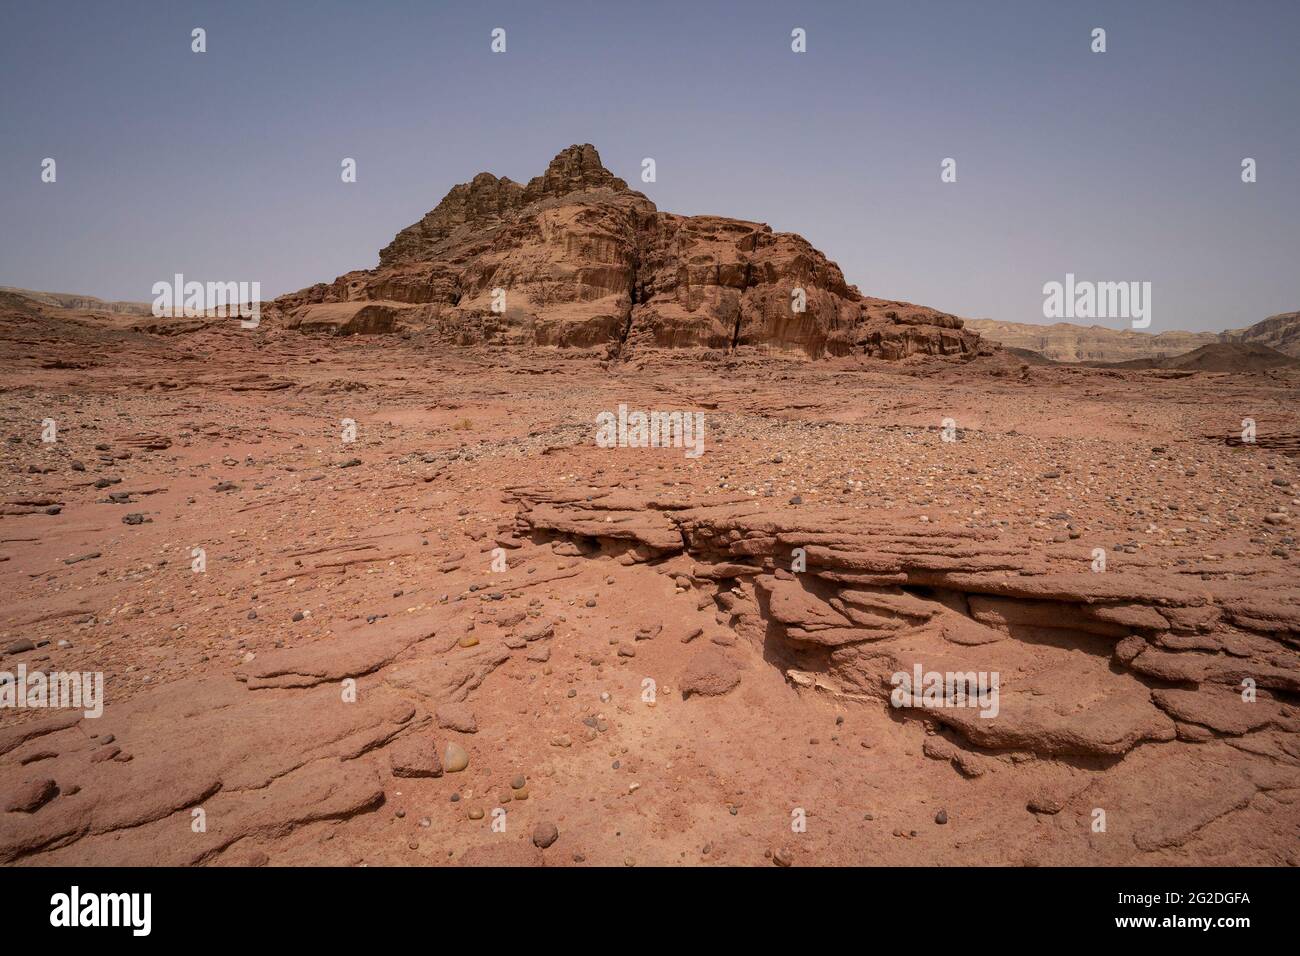 A desert landscape with red sand and red rock formations, in the Timna valley park in southern Israel. Stock Photo